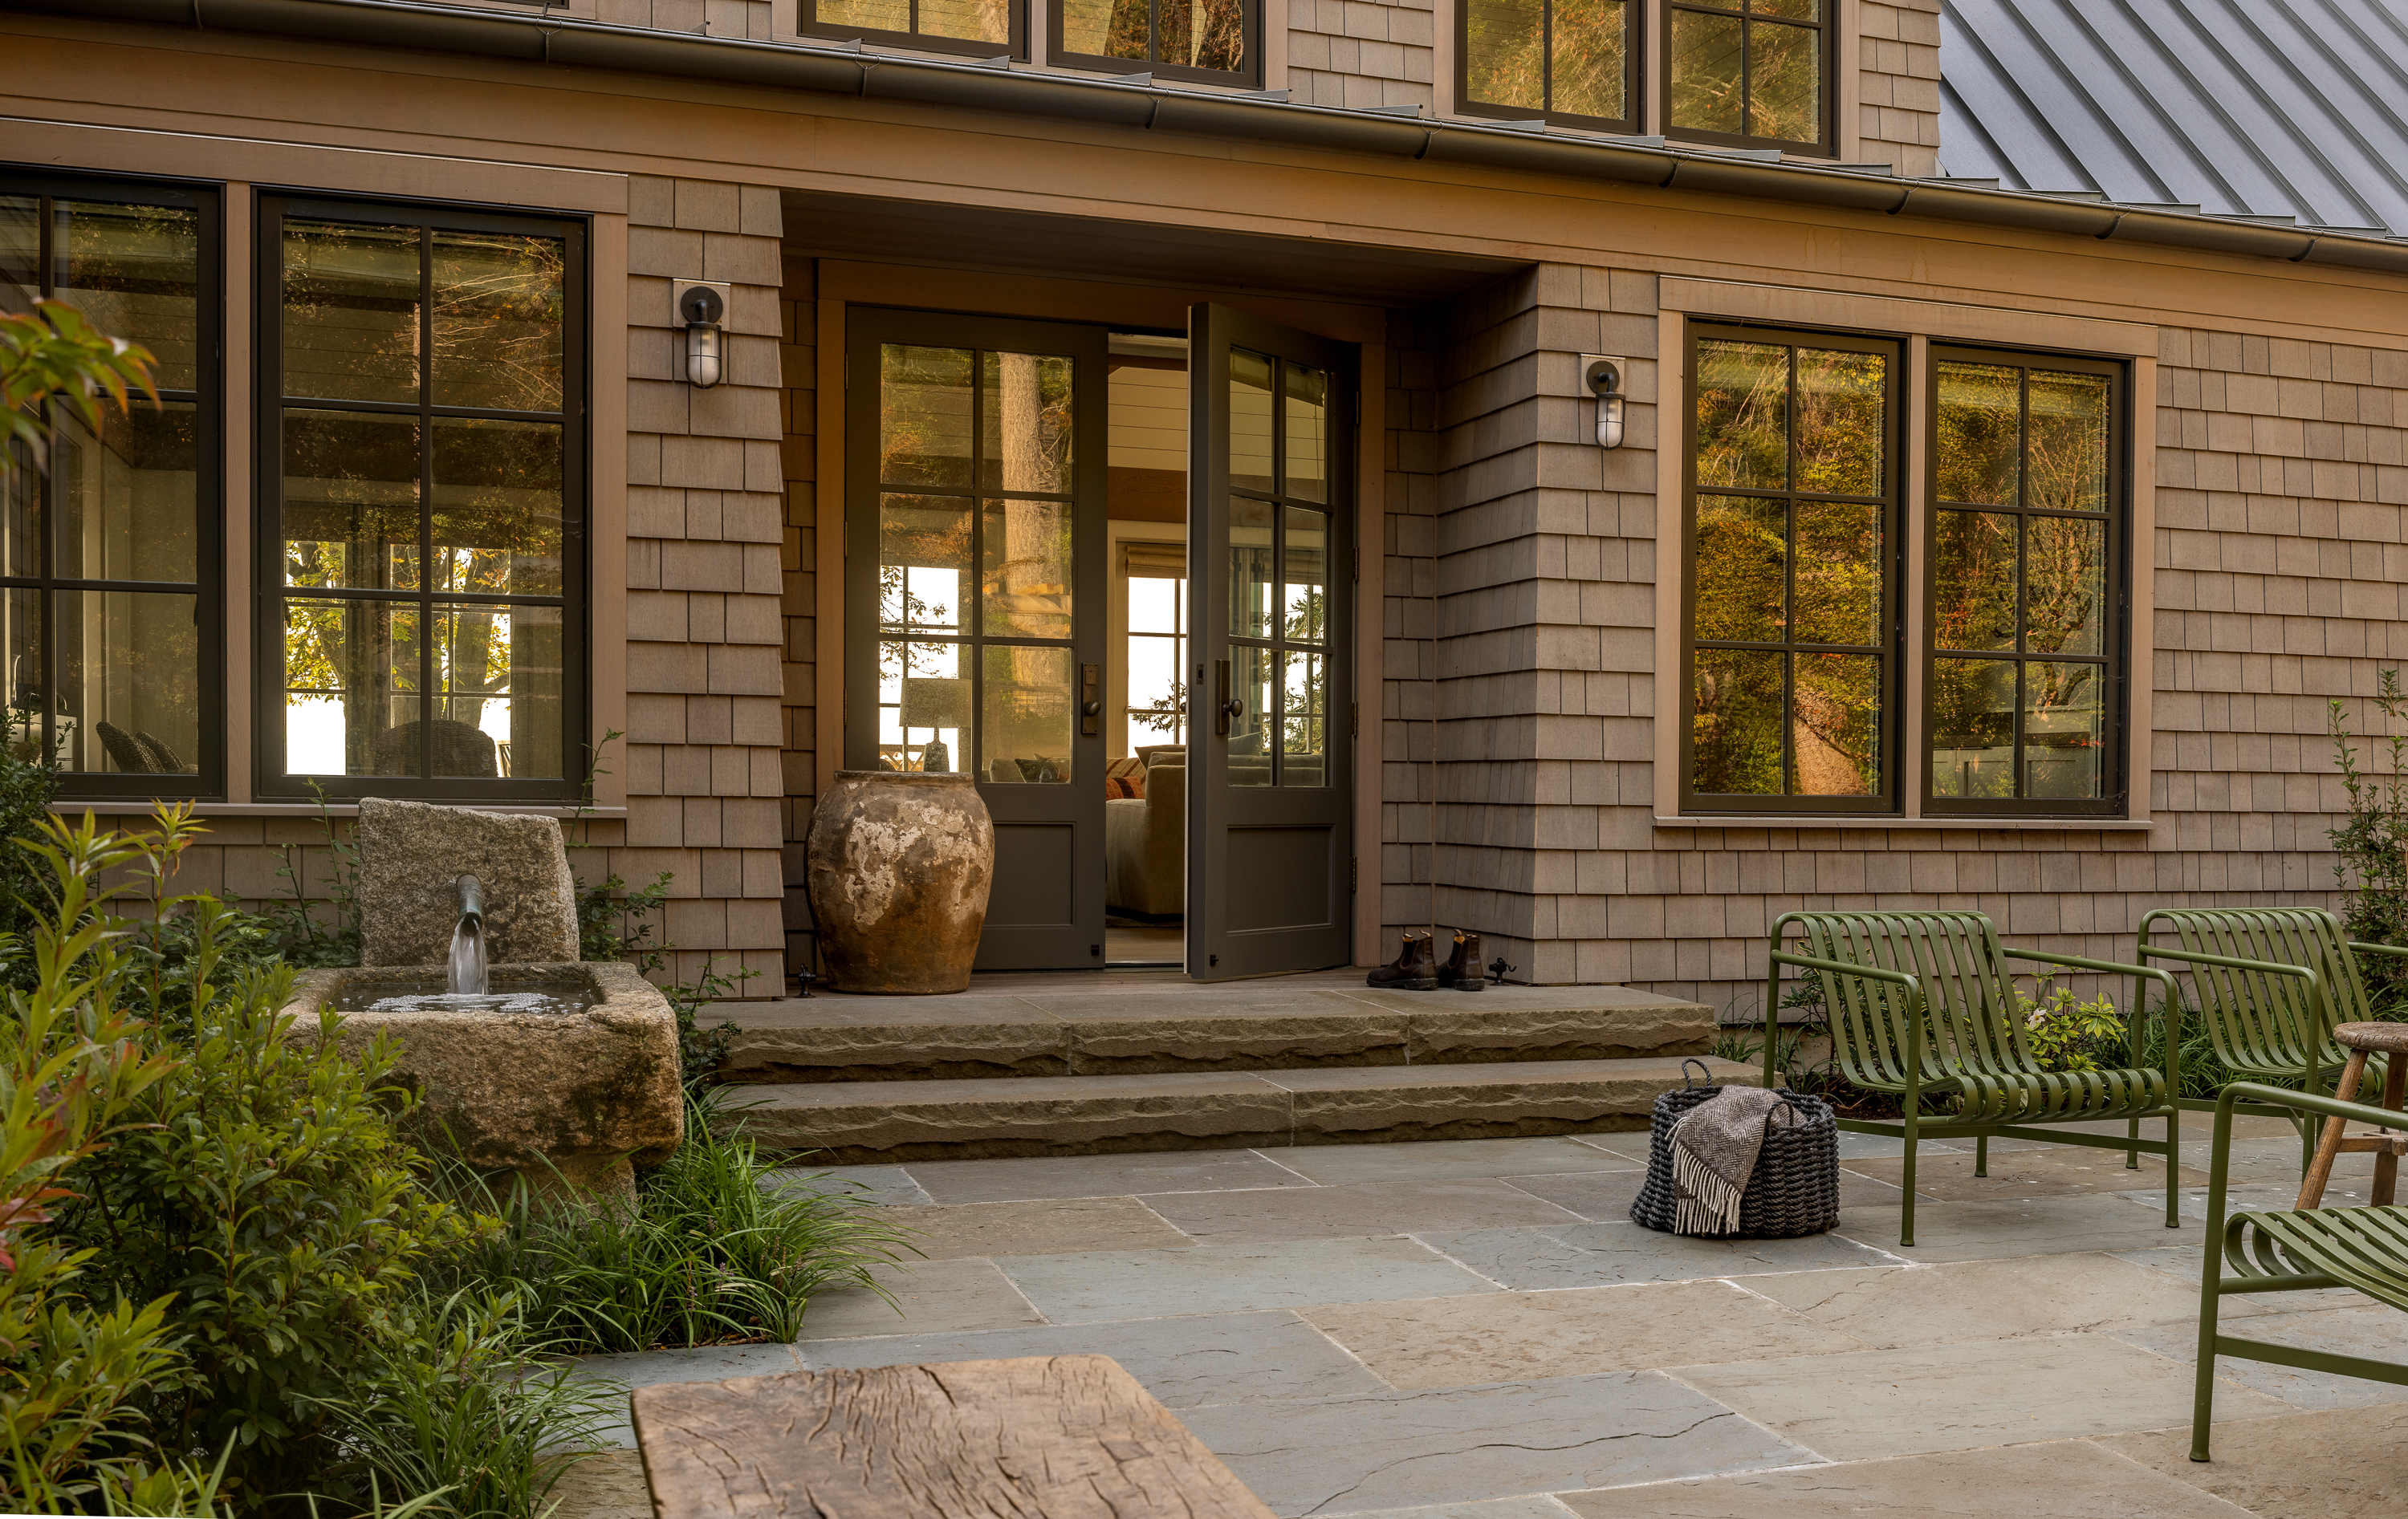 The main entry exterior features large stone steps, a water feature, and an open patio space, creating a welcoming and serene outdoor ambiance.